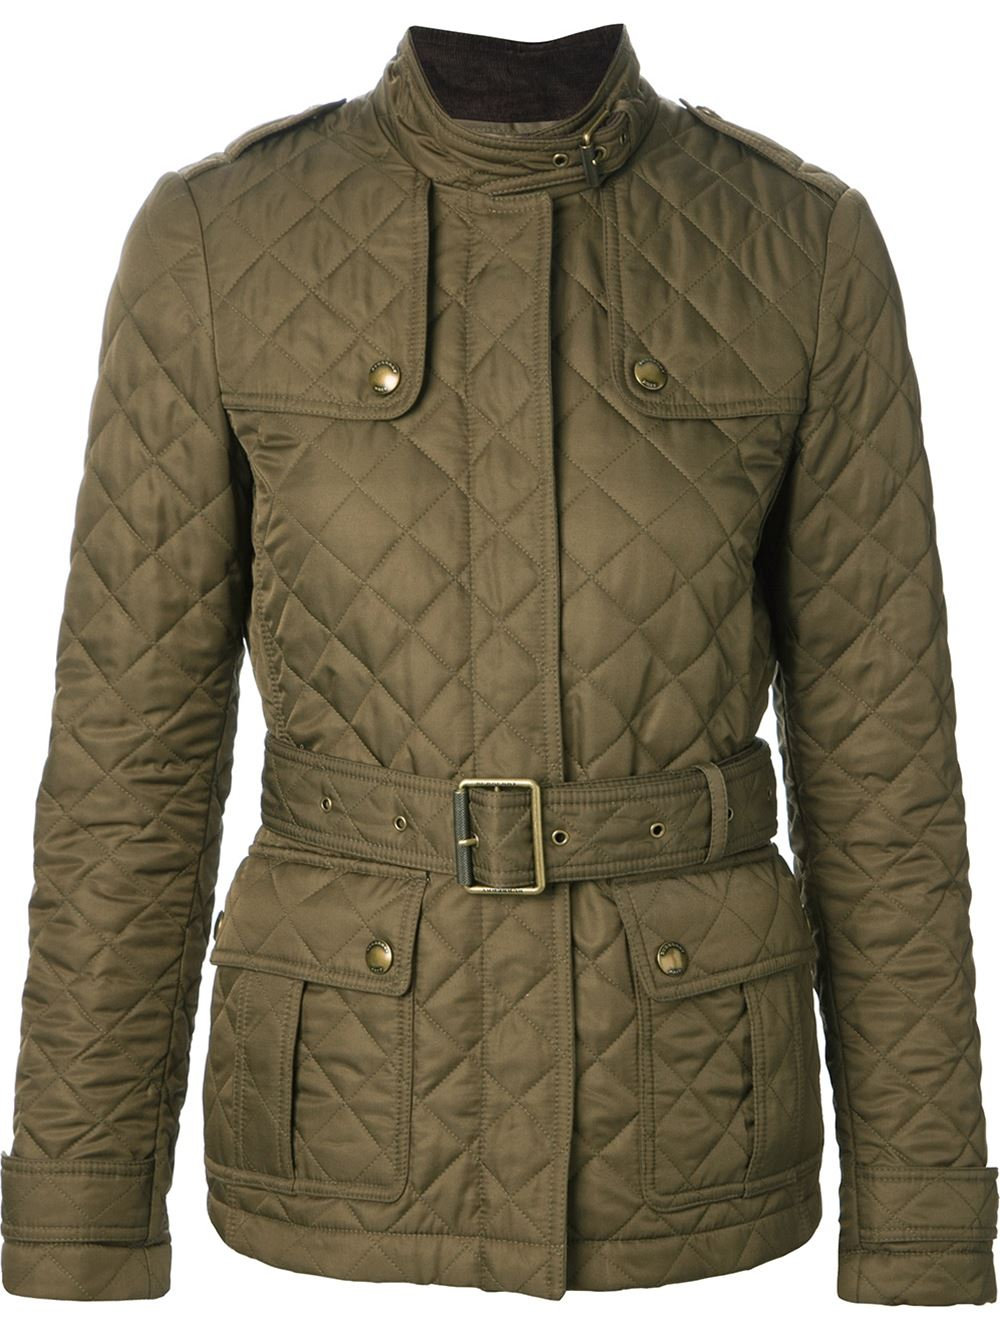 Lyst - Burberry Brit Quilted Belted Jacket in Green